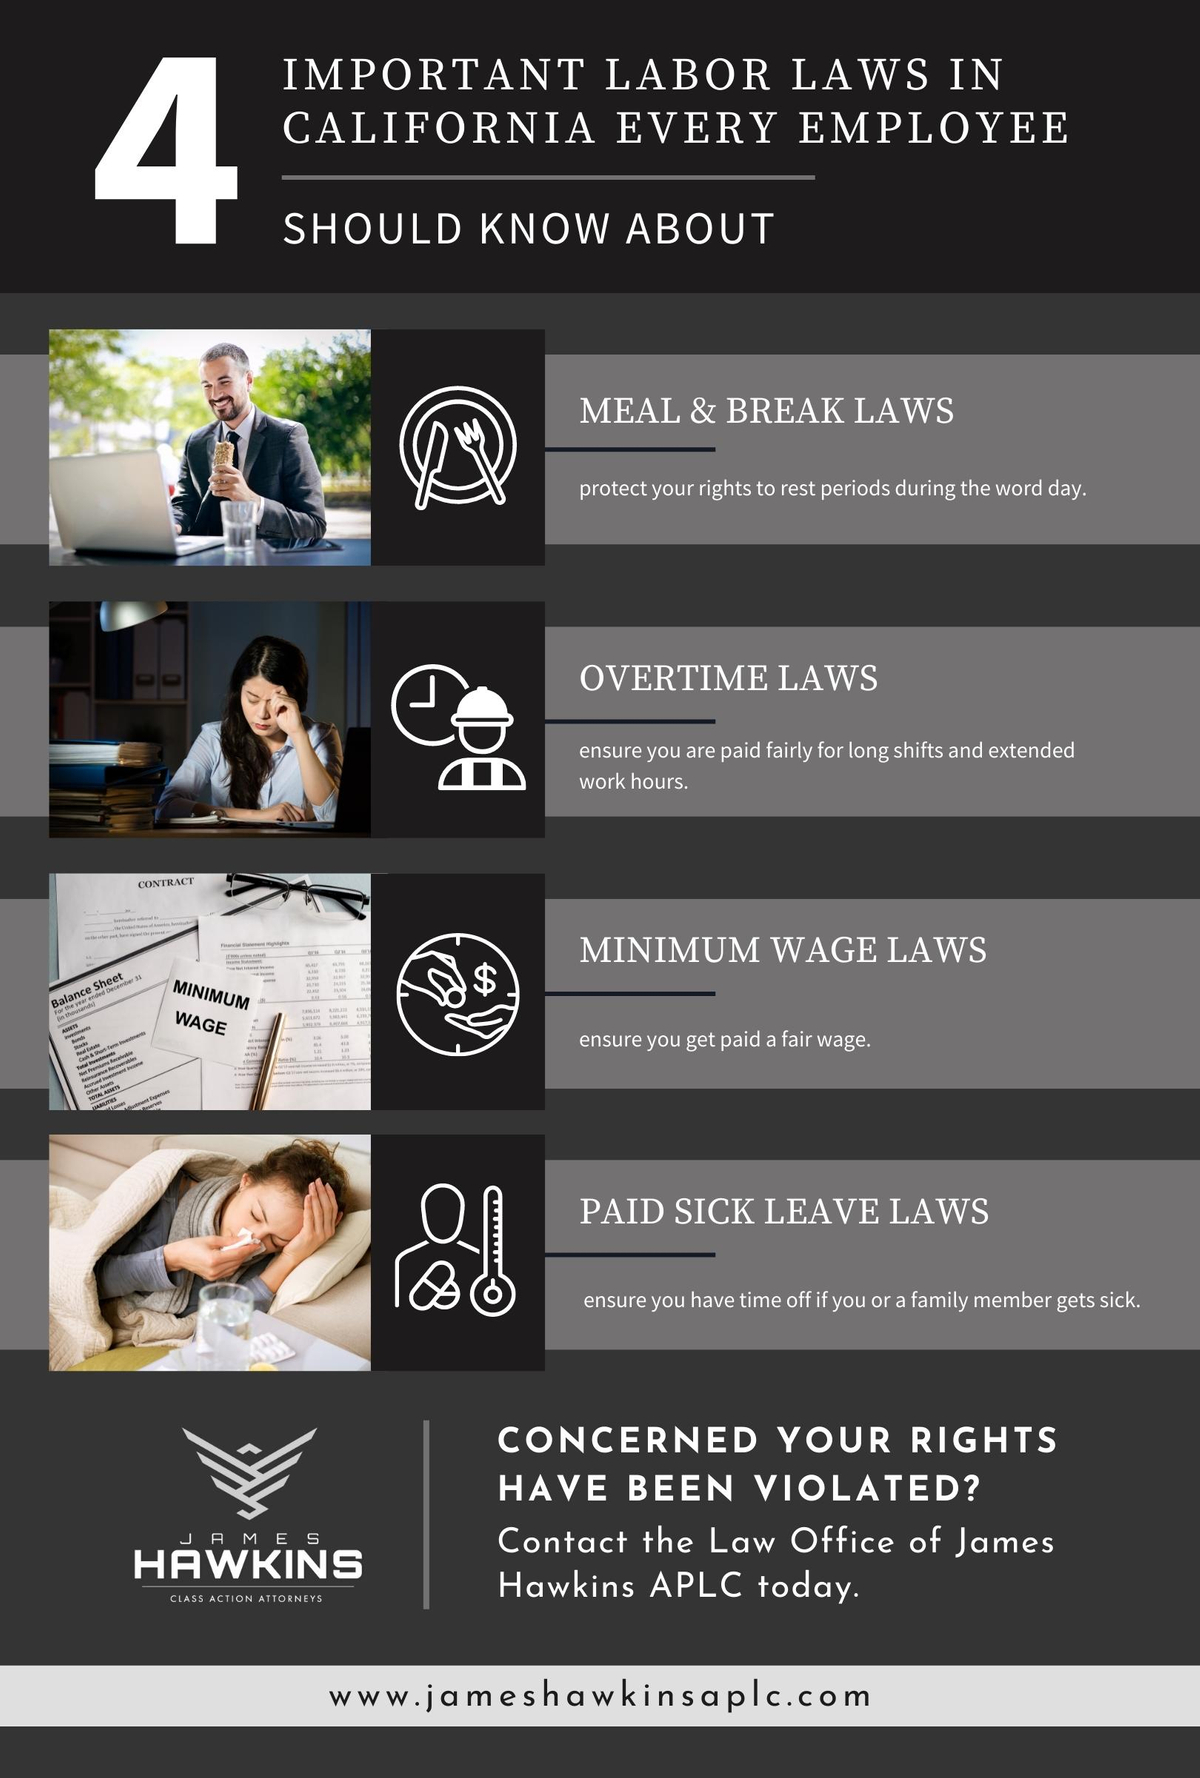 4 Important Labor Laws - Infographic.jpg